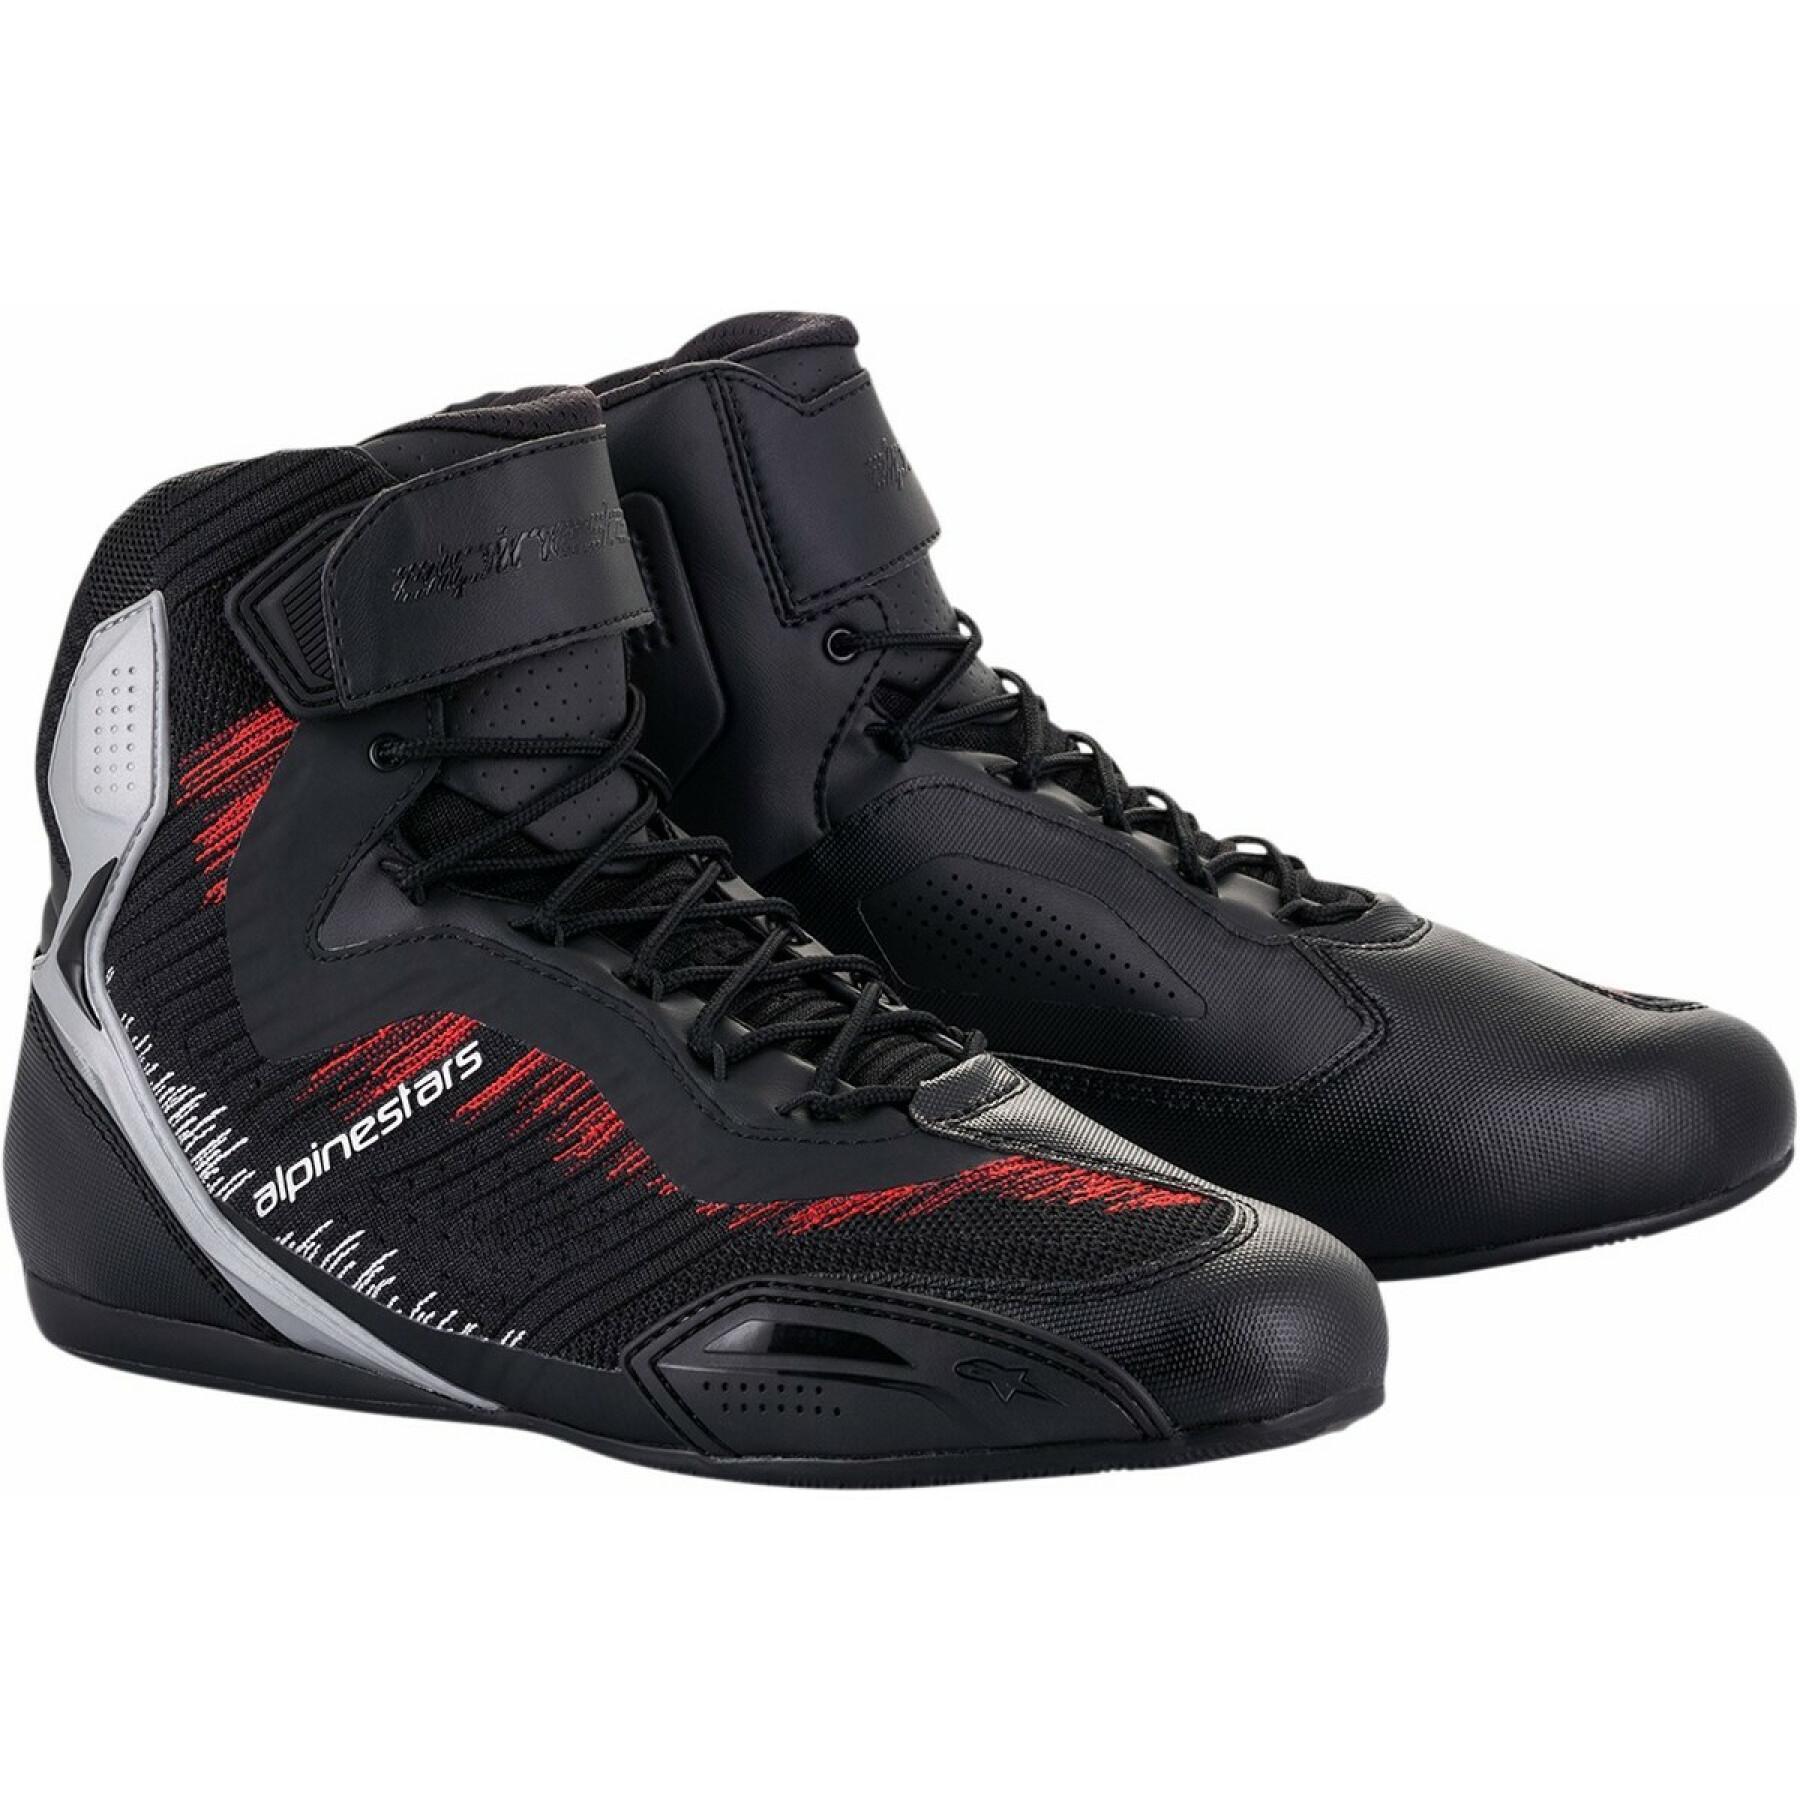 Motorcycle shoes Alpinestars Fast3 RK BSR